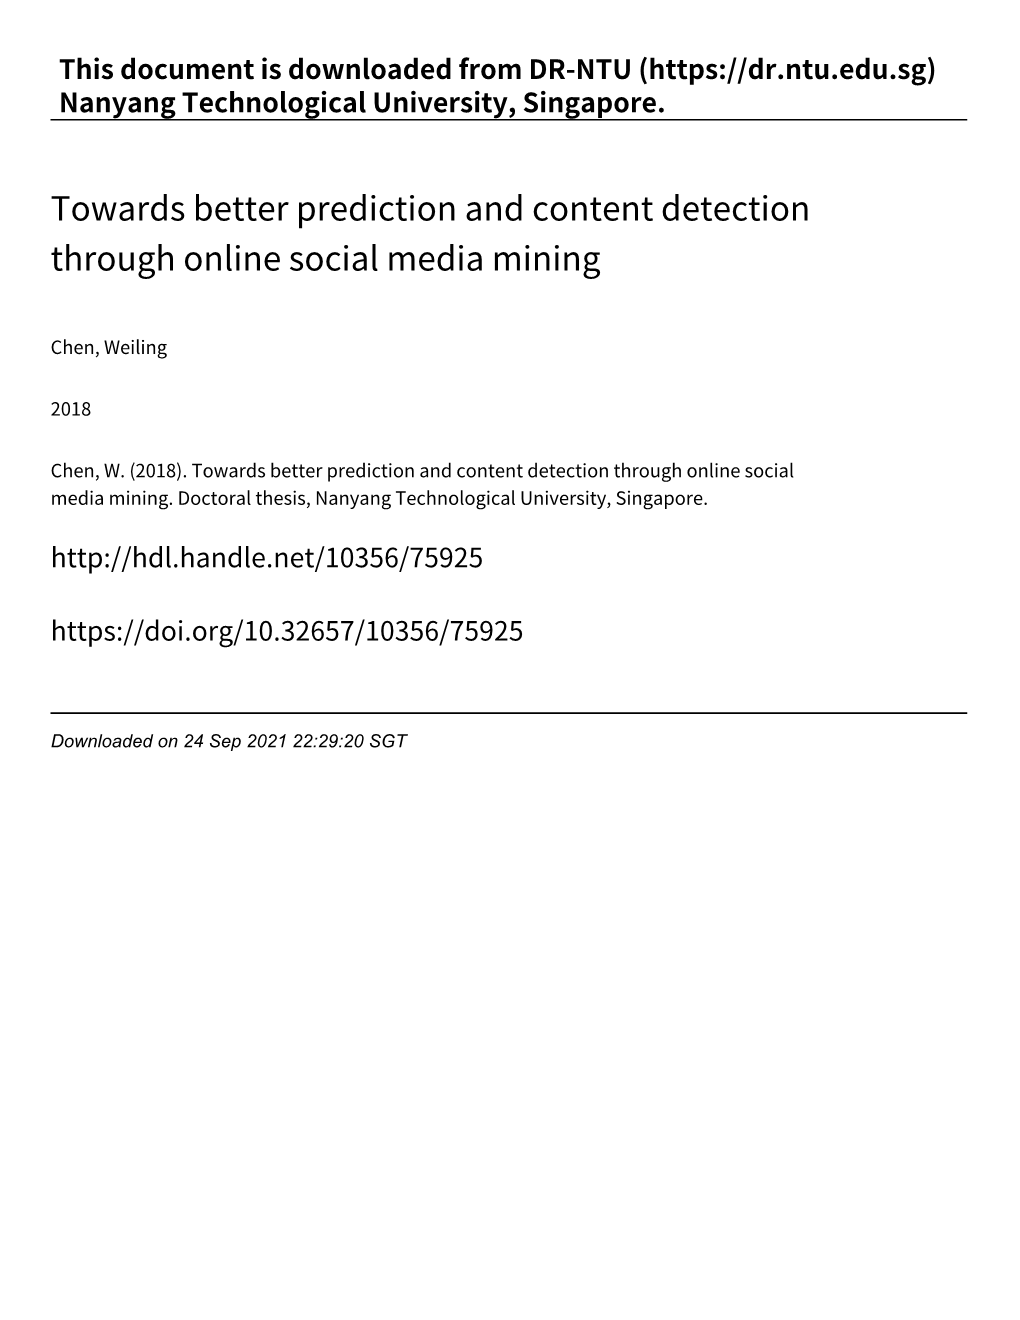 Towards Better Prediction and Content Detection Through Online Social Media Mining